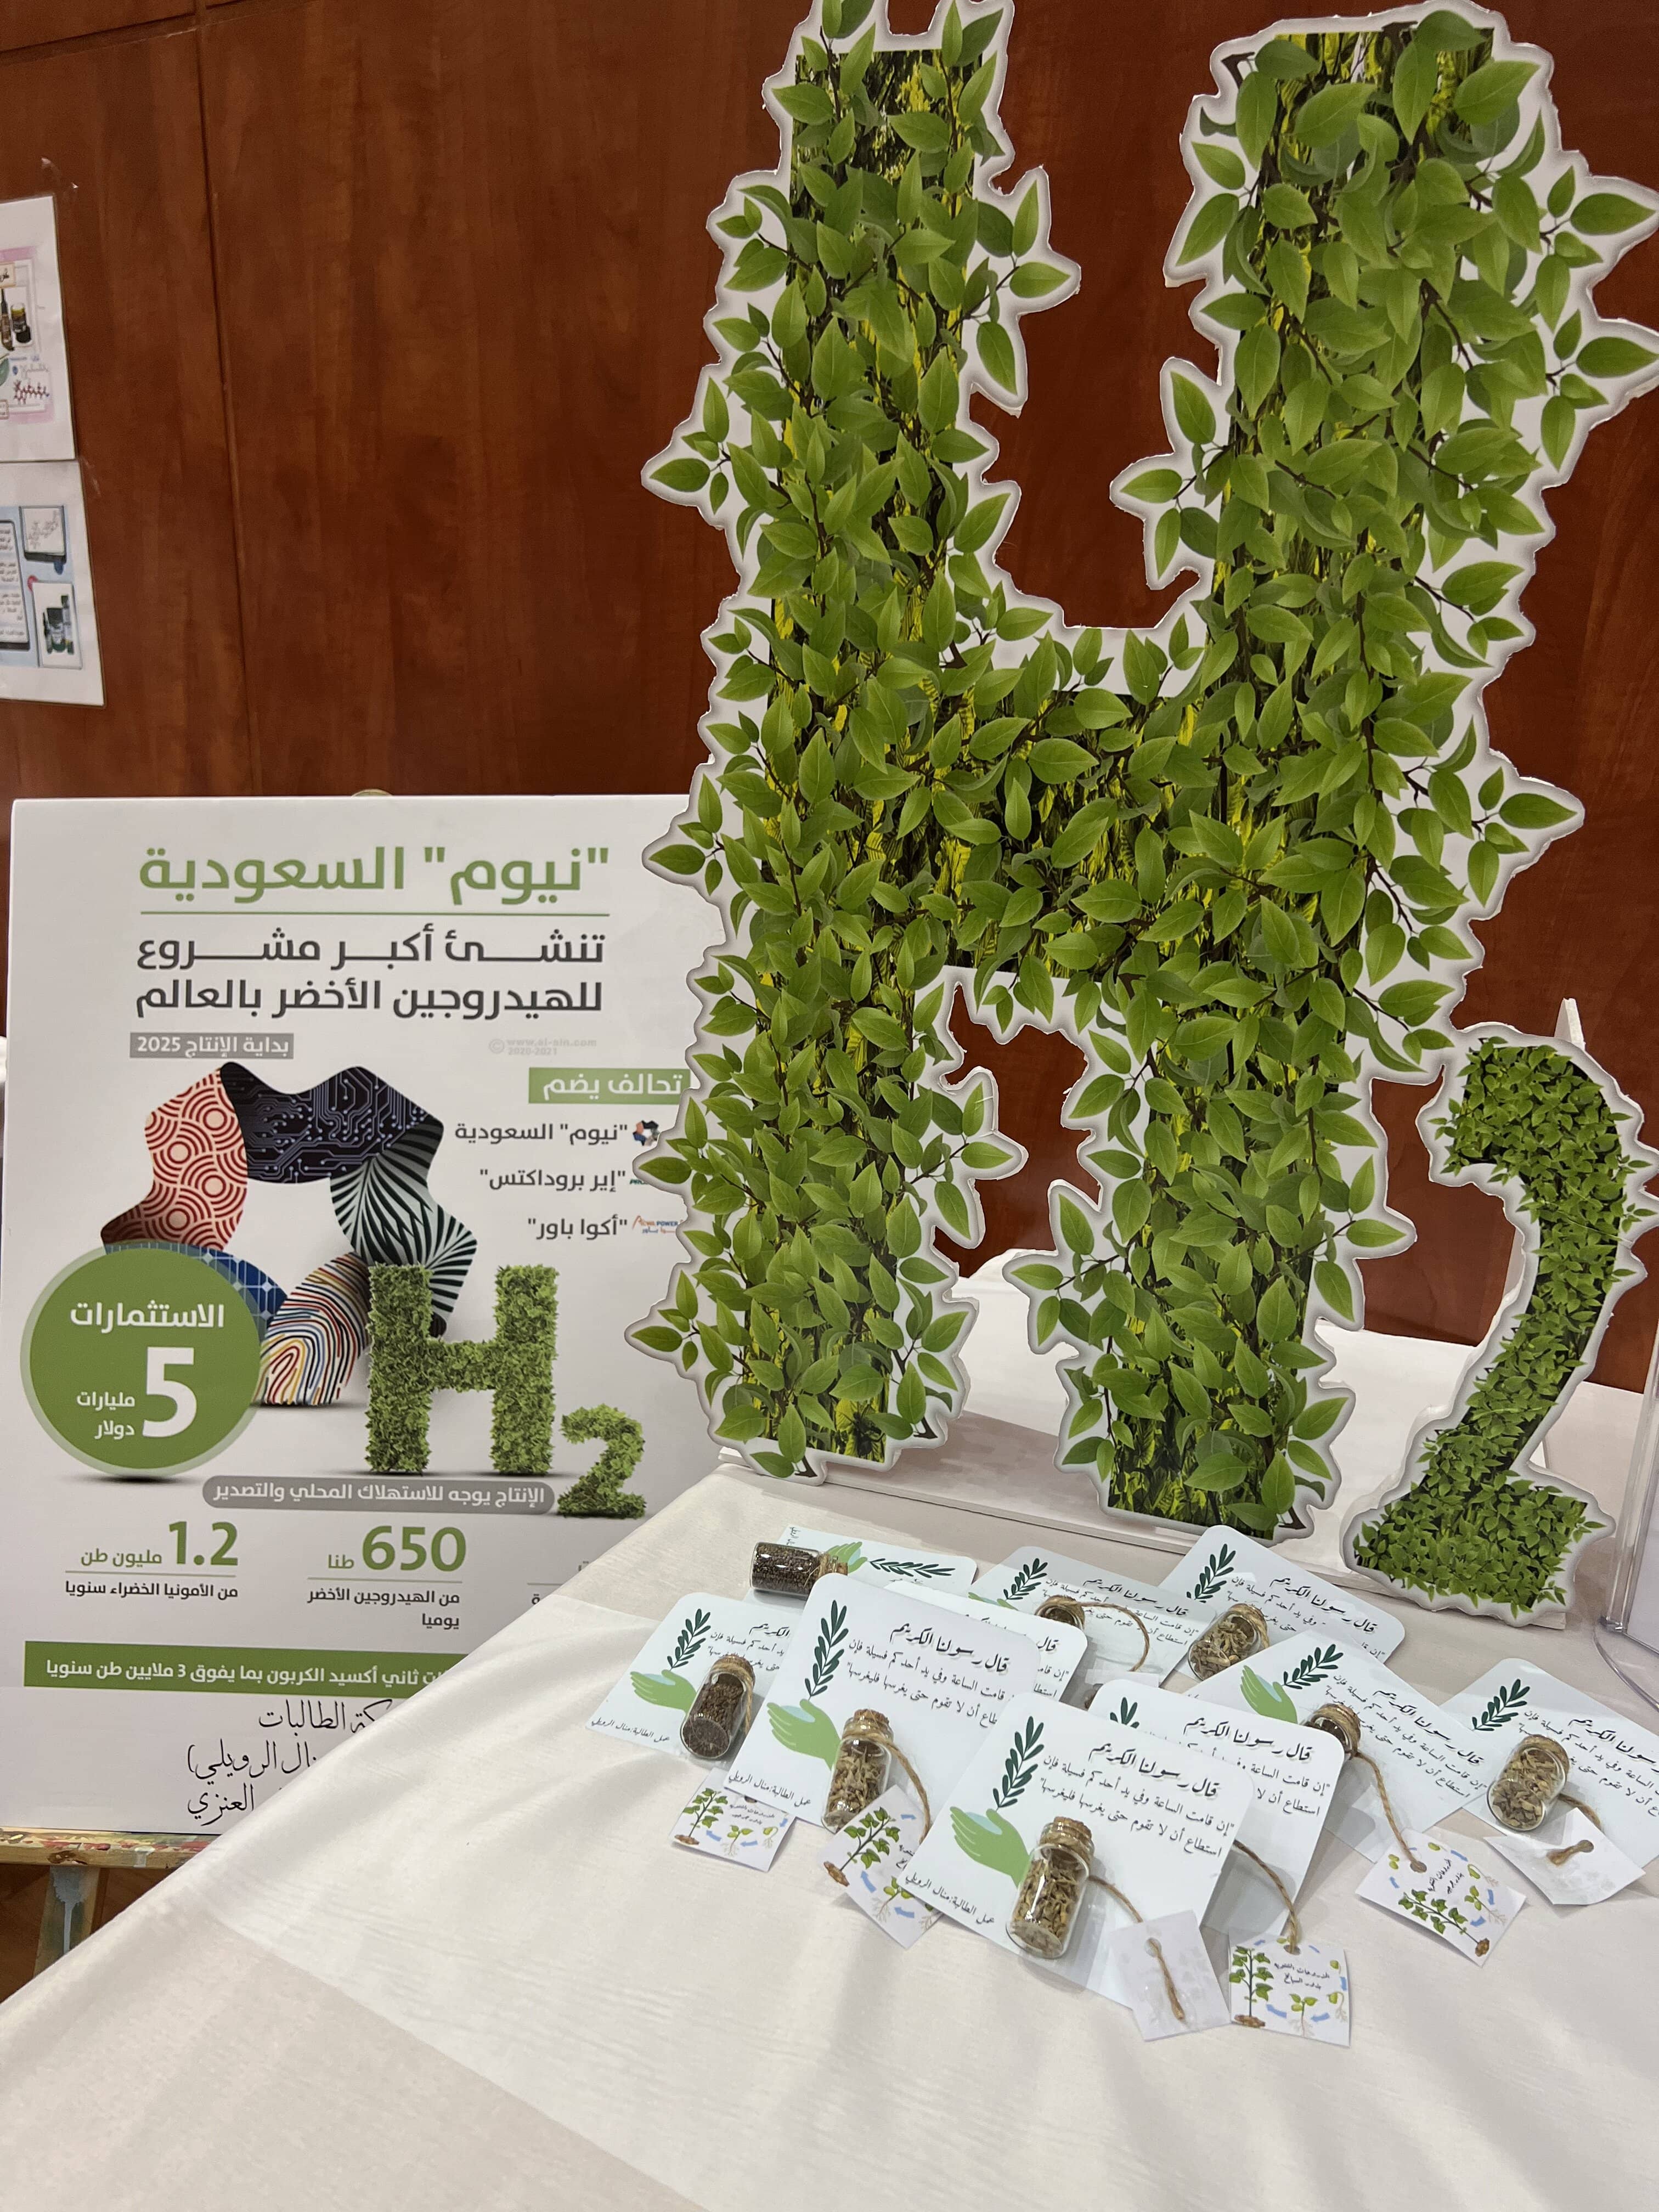 The Girls College Complex in Qurayyat celebrated the Arab Chemistry Week